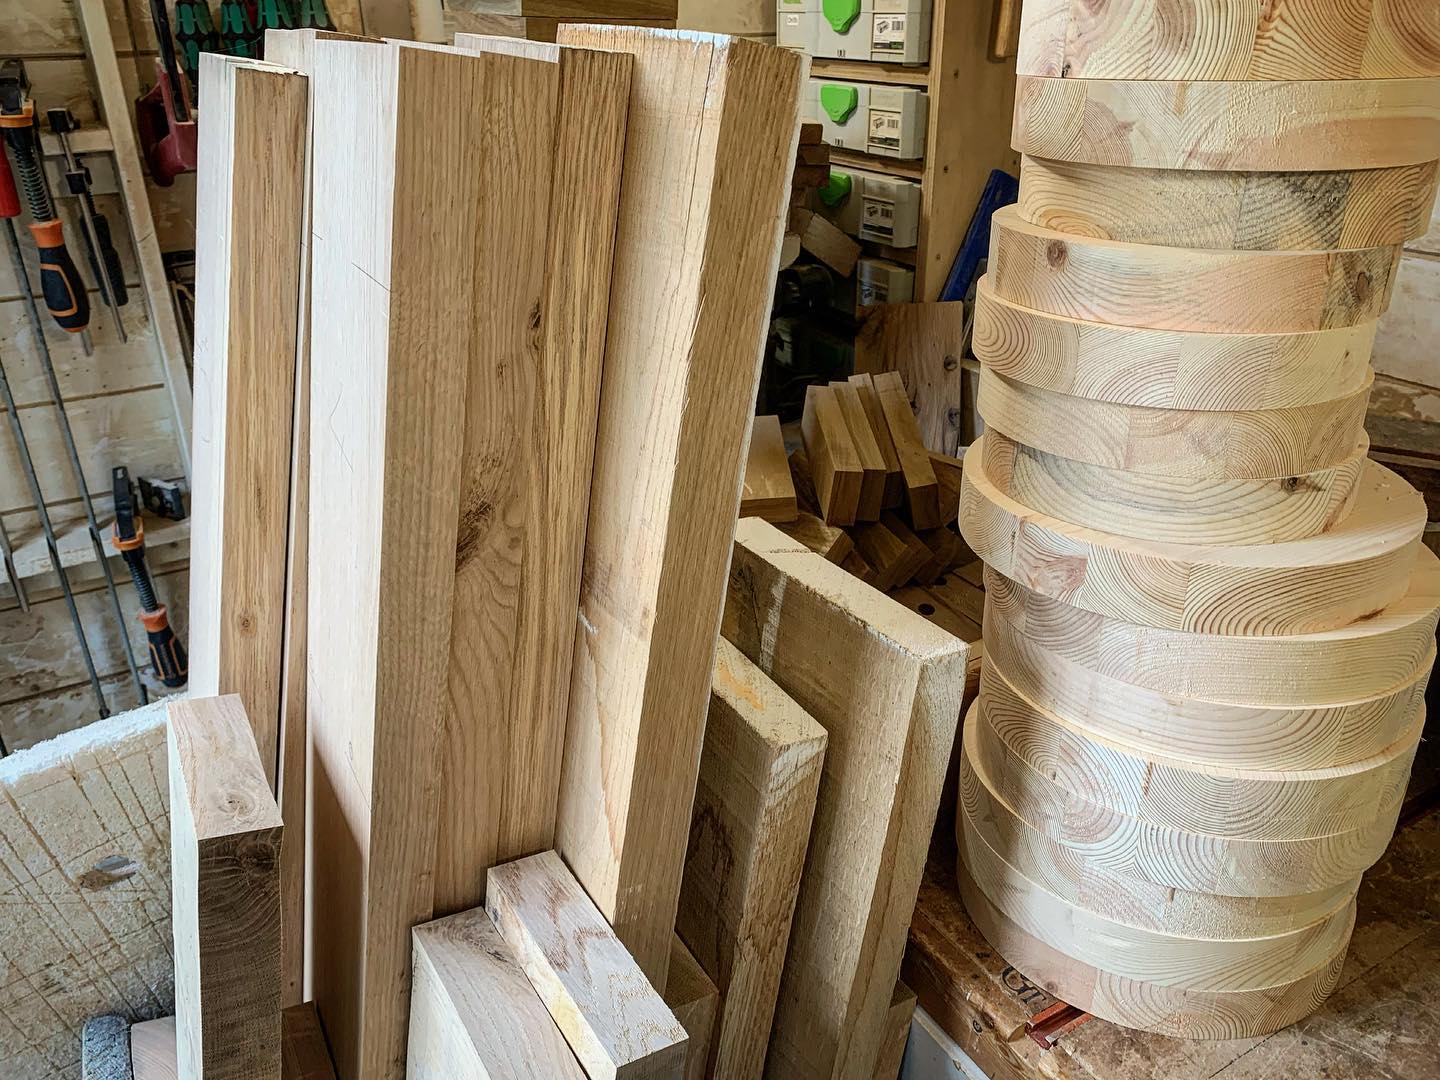 Piles and piles of wood 🤪 lots of work to do this week ready for @clevedonsundaymarket